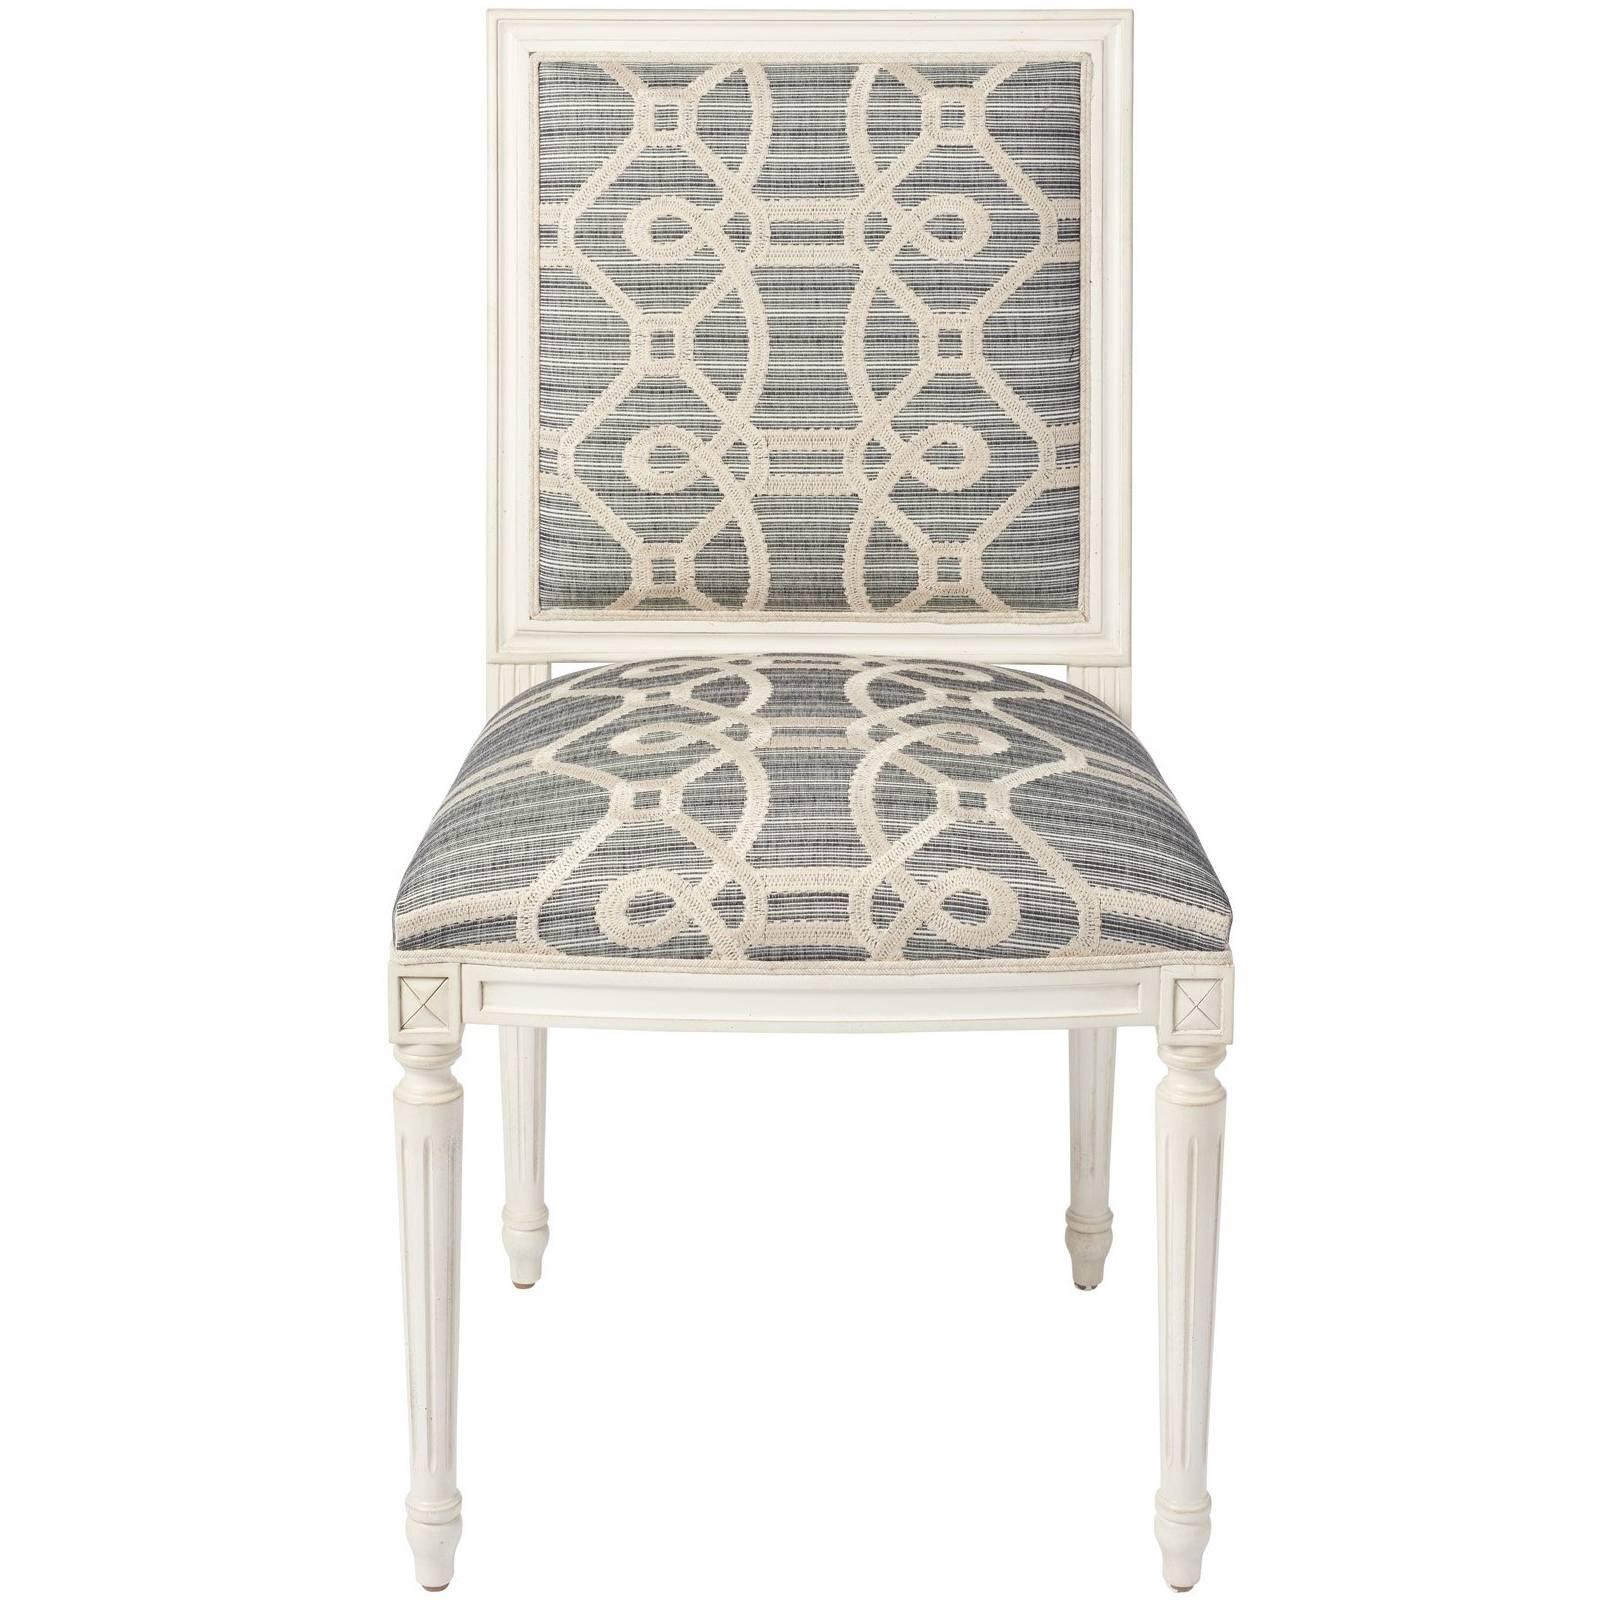 Schumacher Marie Therese Ziz Embroidery Strié Hand-Carved Beechwood Side Chair 